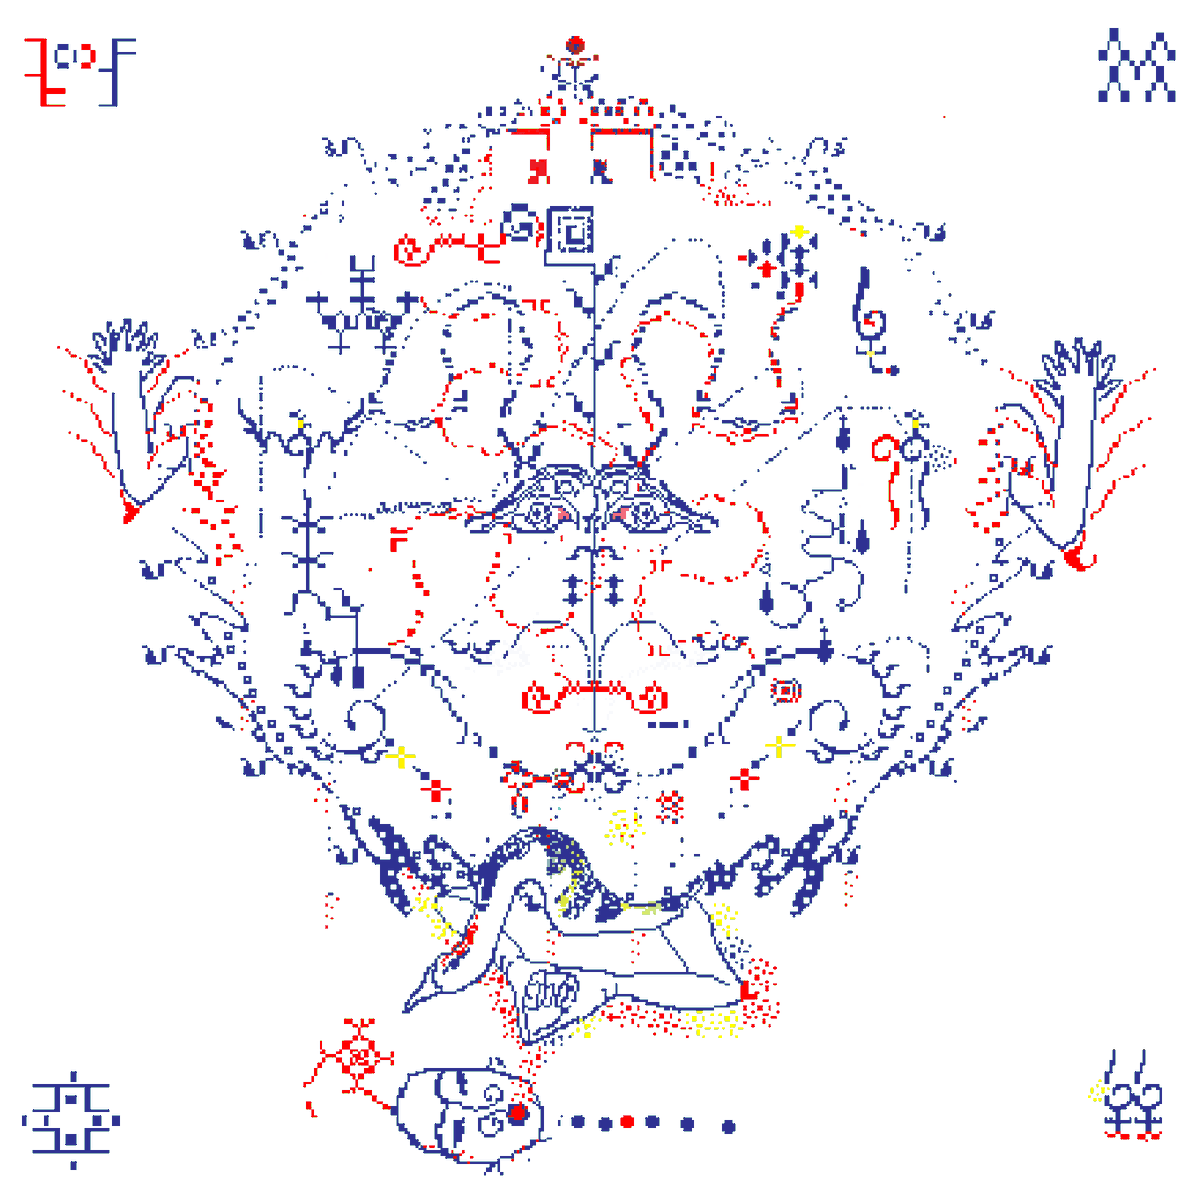 C.A.N.V.A.S. is proud to announce Wirehead by Xao @__xao__ to be released on 2nd December 2022 Stream ‘Bone Theory’ and ‘Ophanim Plushie’ and pre-order the Vinyl LP and Digital album at canvas-index.bandcamp.com Artwork by Somnath Bhatt @sad_folder